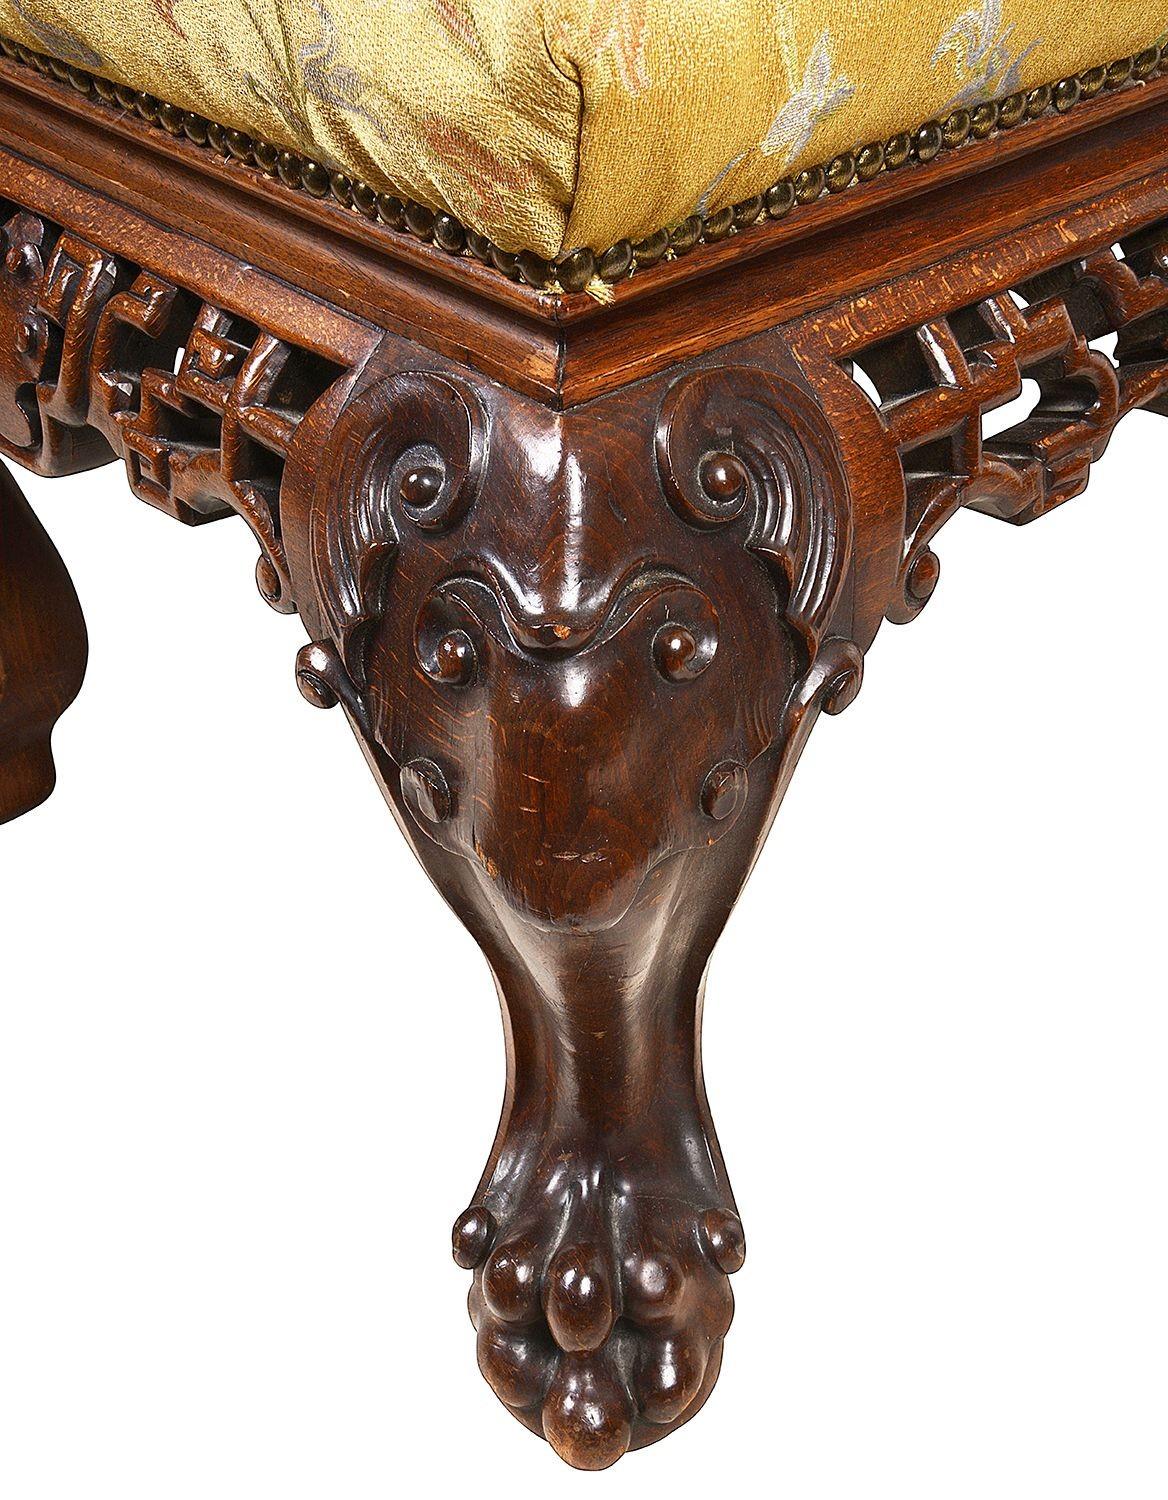 A wonderfully stylish 19th century Oriental style stool, with pierced fretwork decoration to the frieze, stuff over upholstered seat, raised on classical carved cabriole legs with mythical masks, terminating in claw feet.
Batch 67 61065 HAKE

